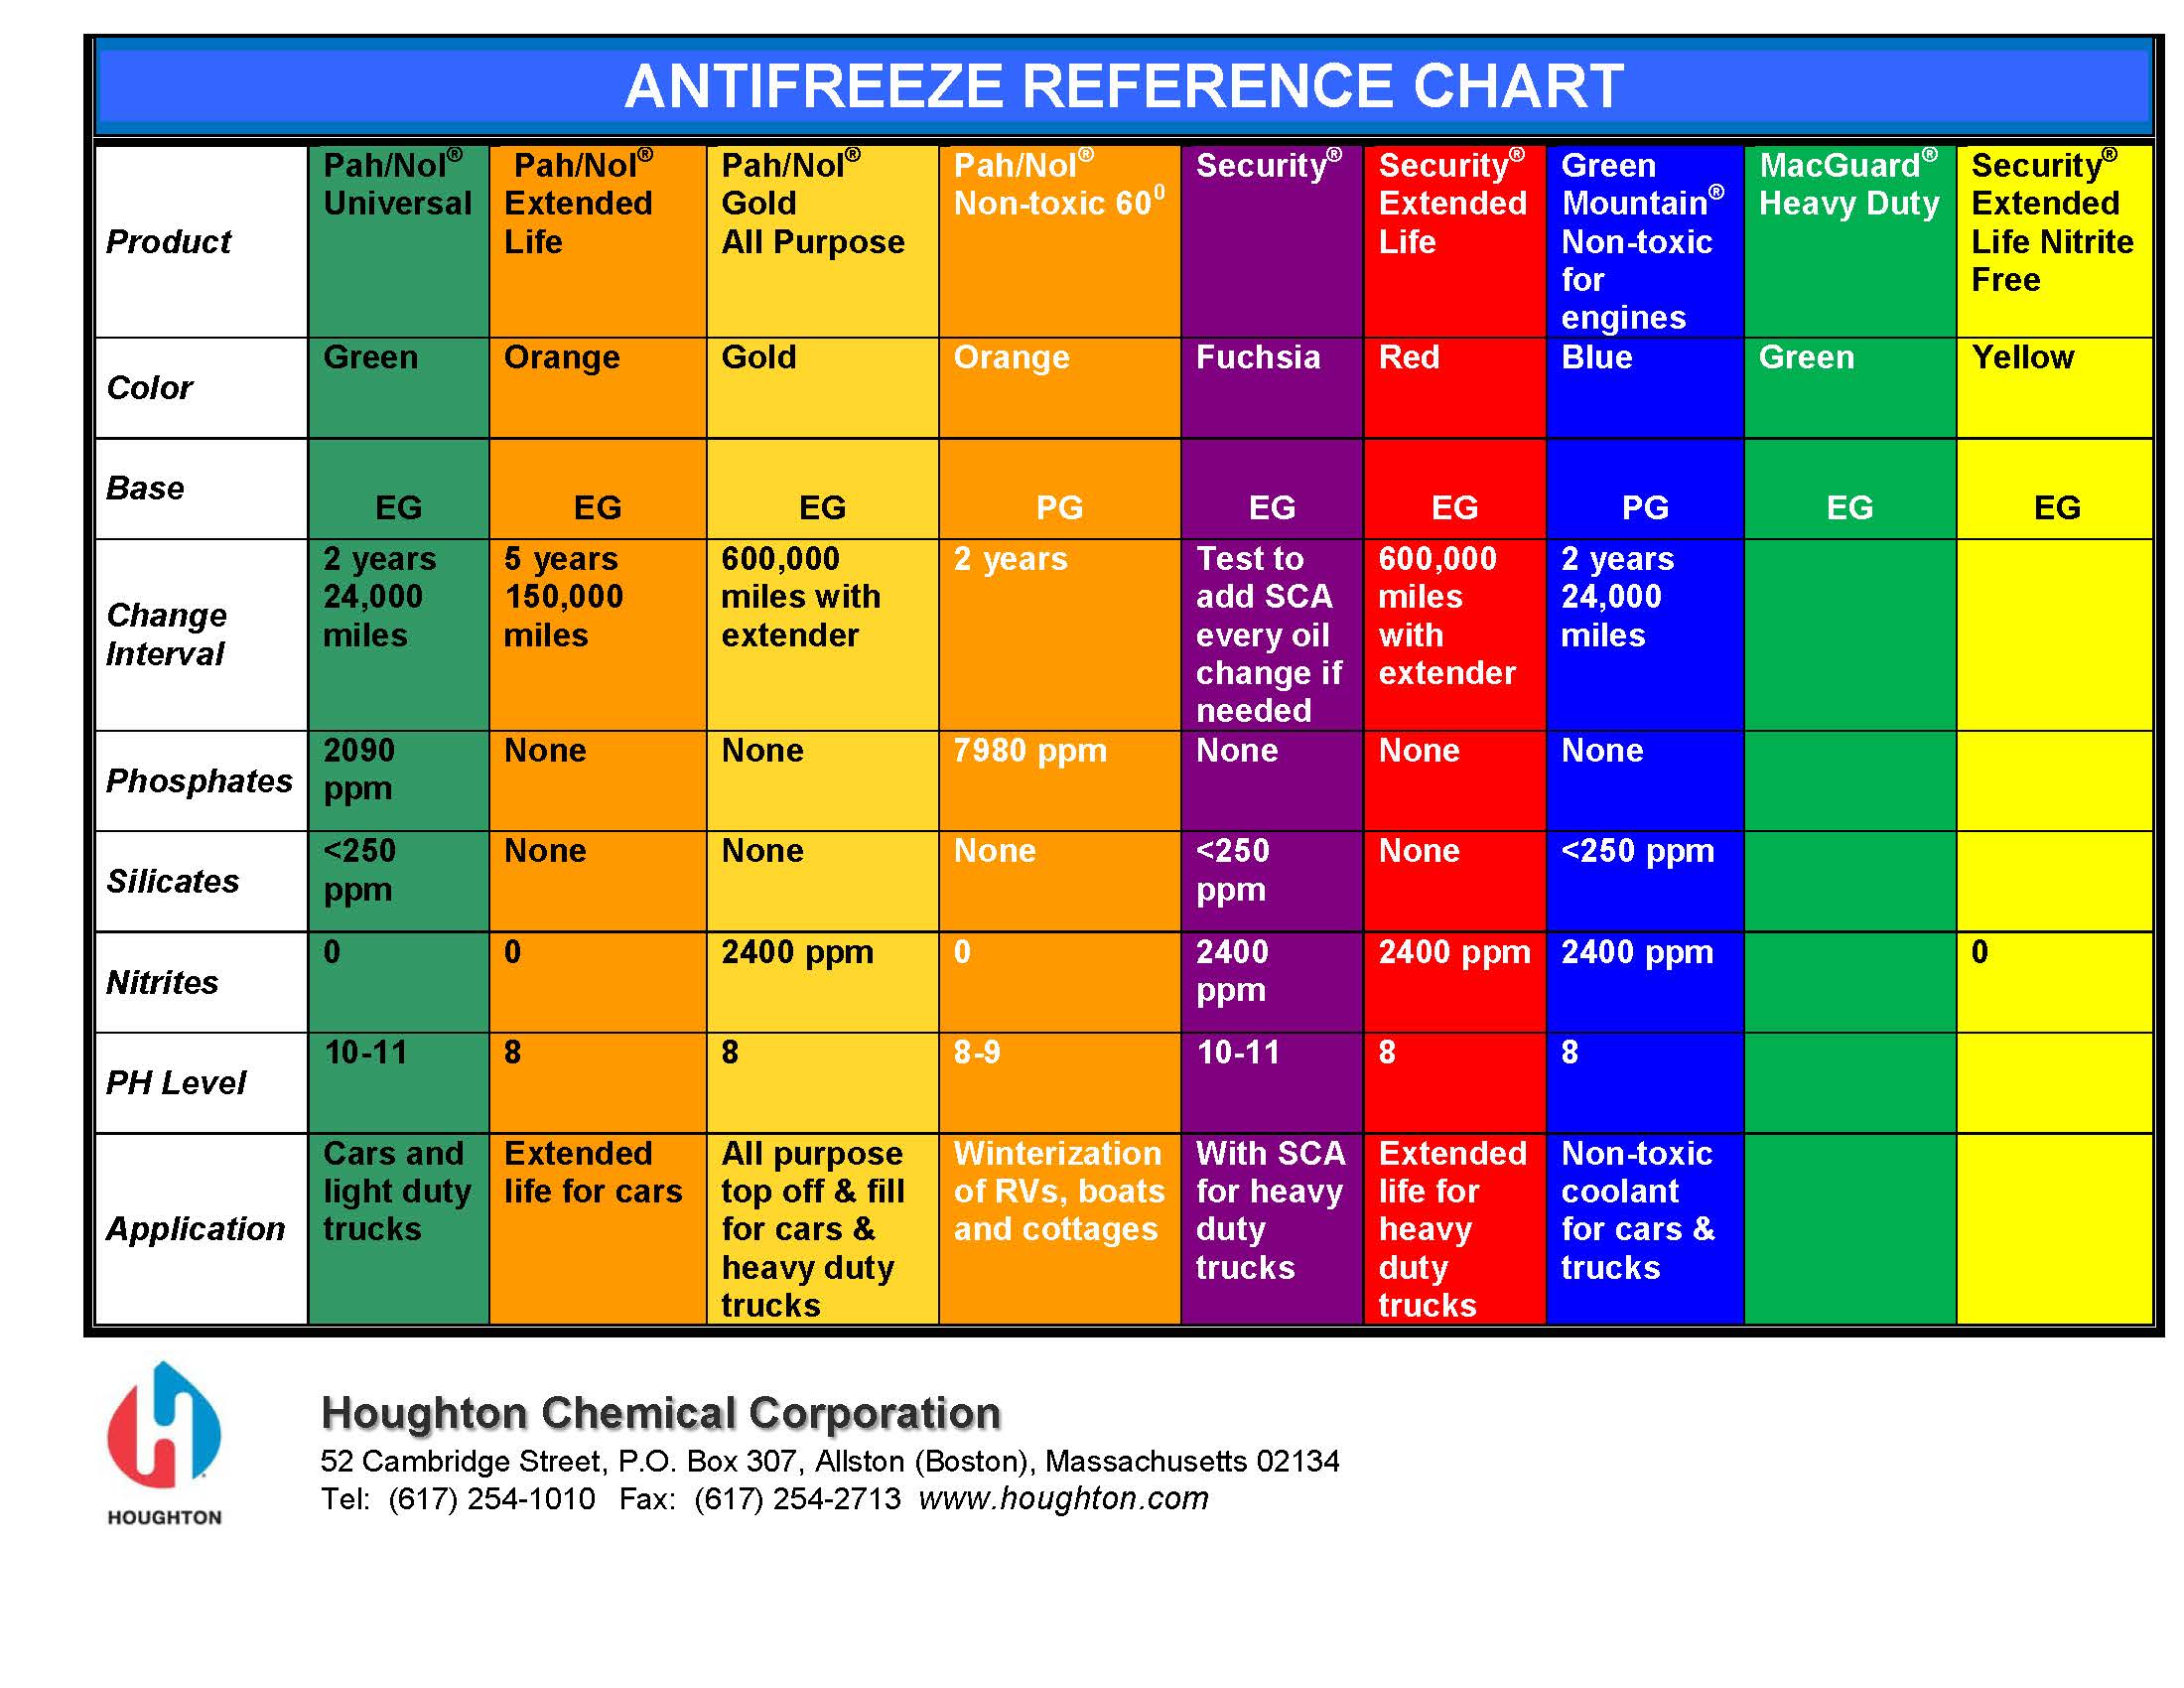 chart-below-or-click-here-to-view-the-peak-antifreeze-reference-chart